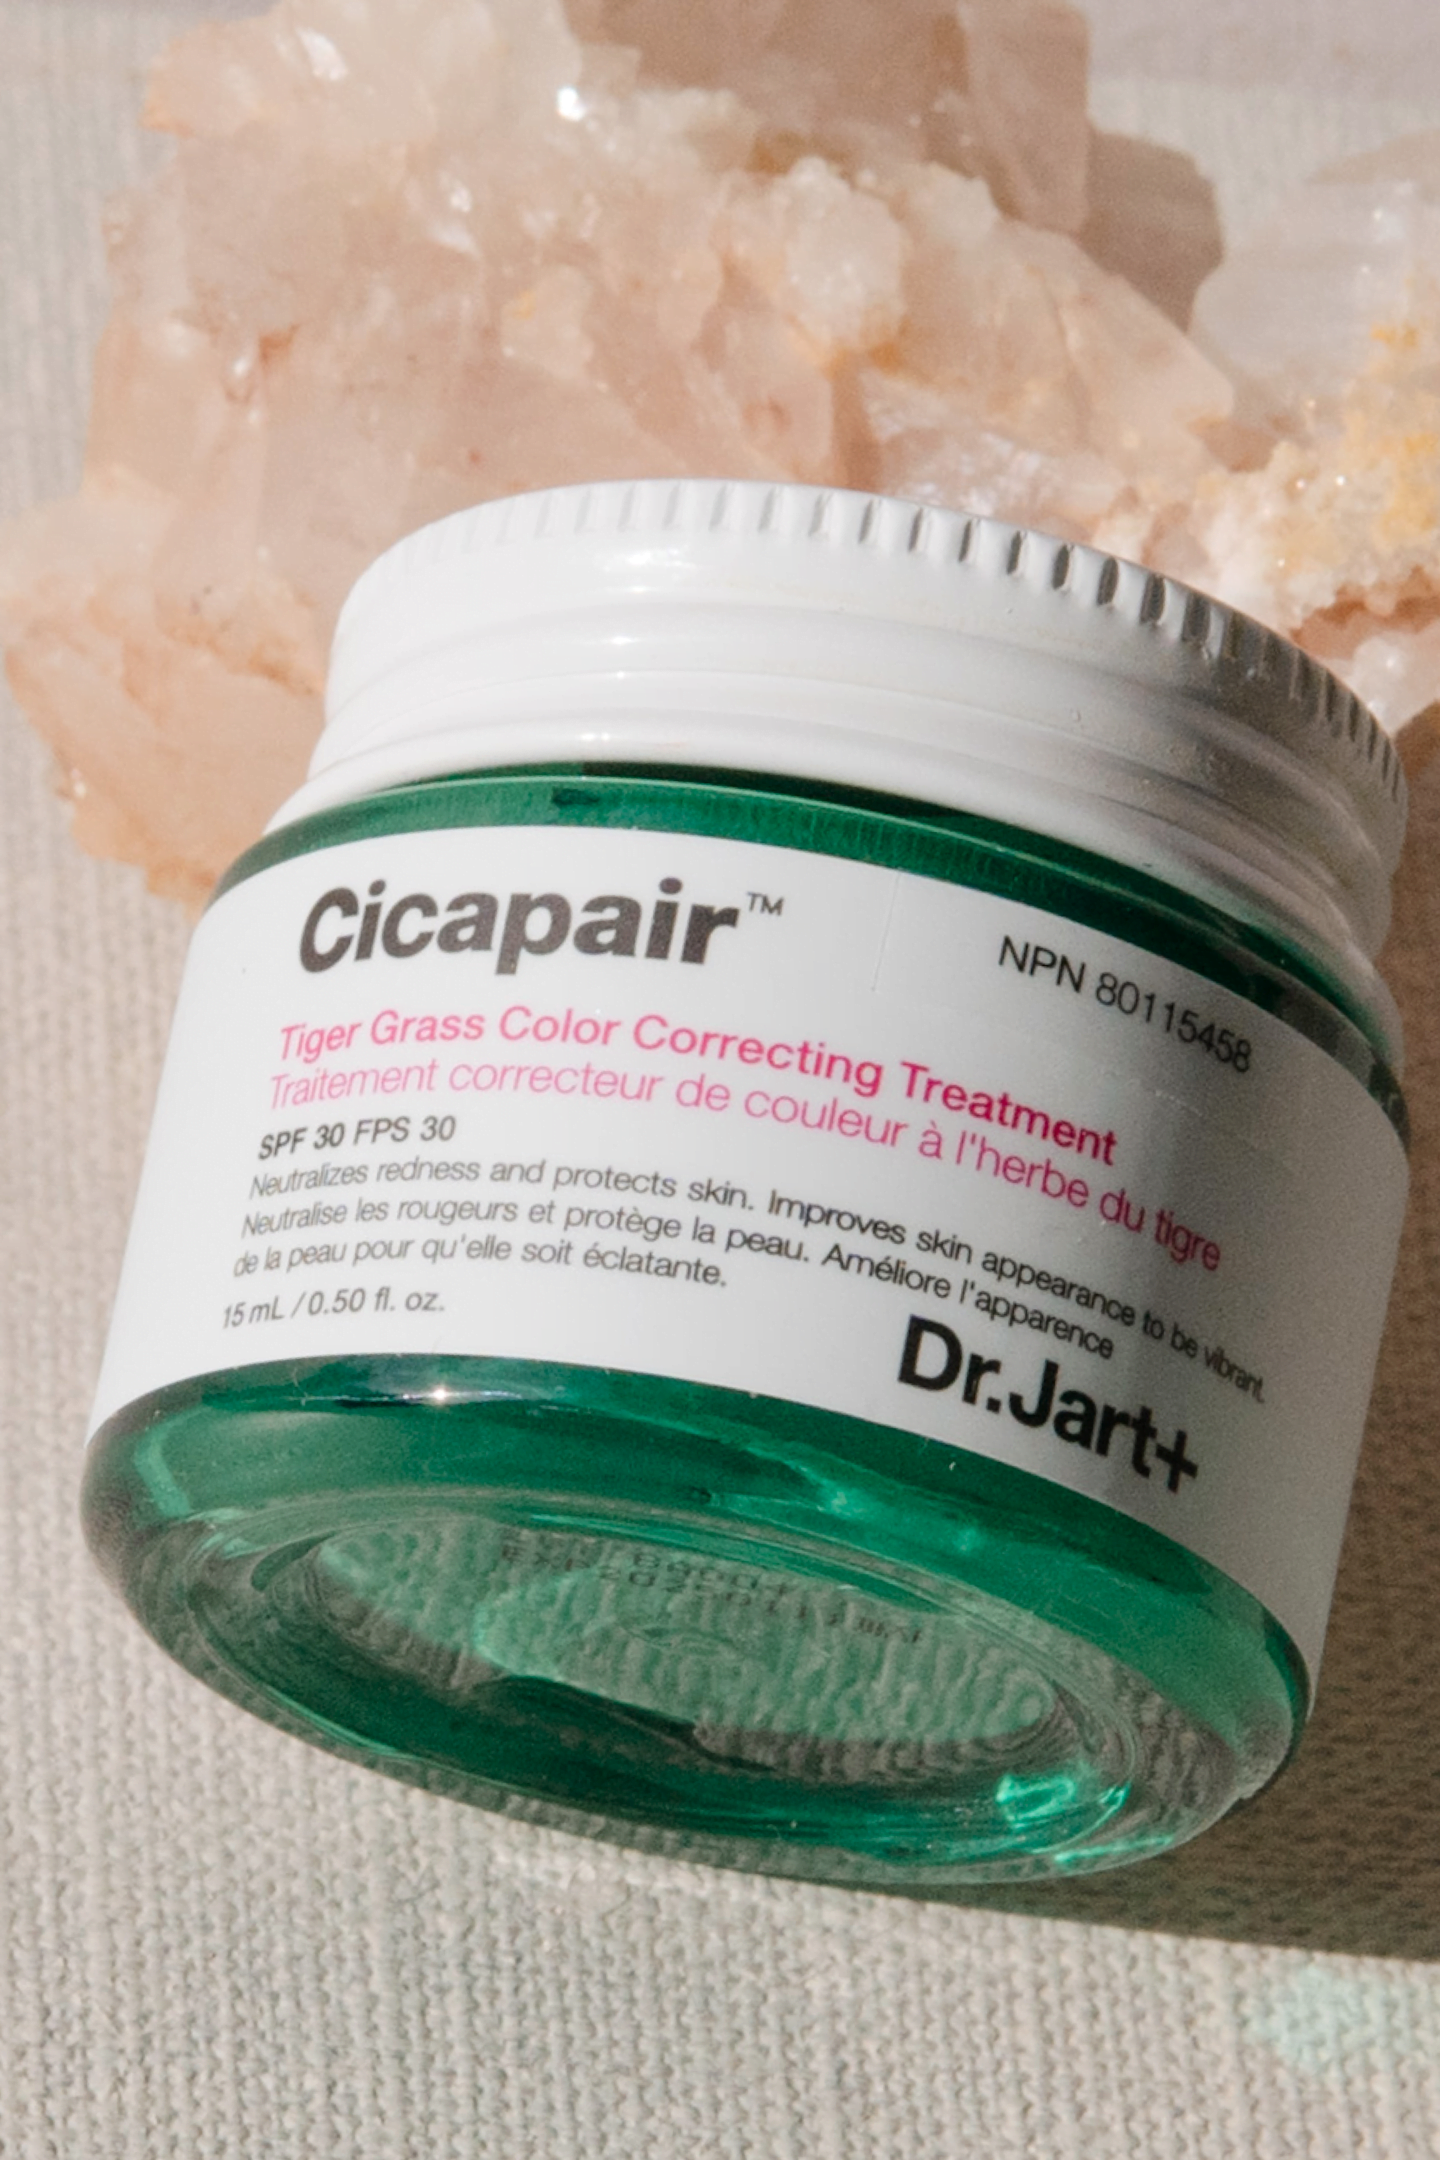 My Favourite Color Correcting Primers For Rosacea Flare-Ups